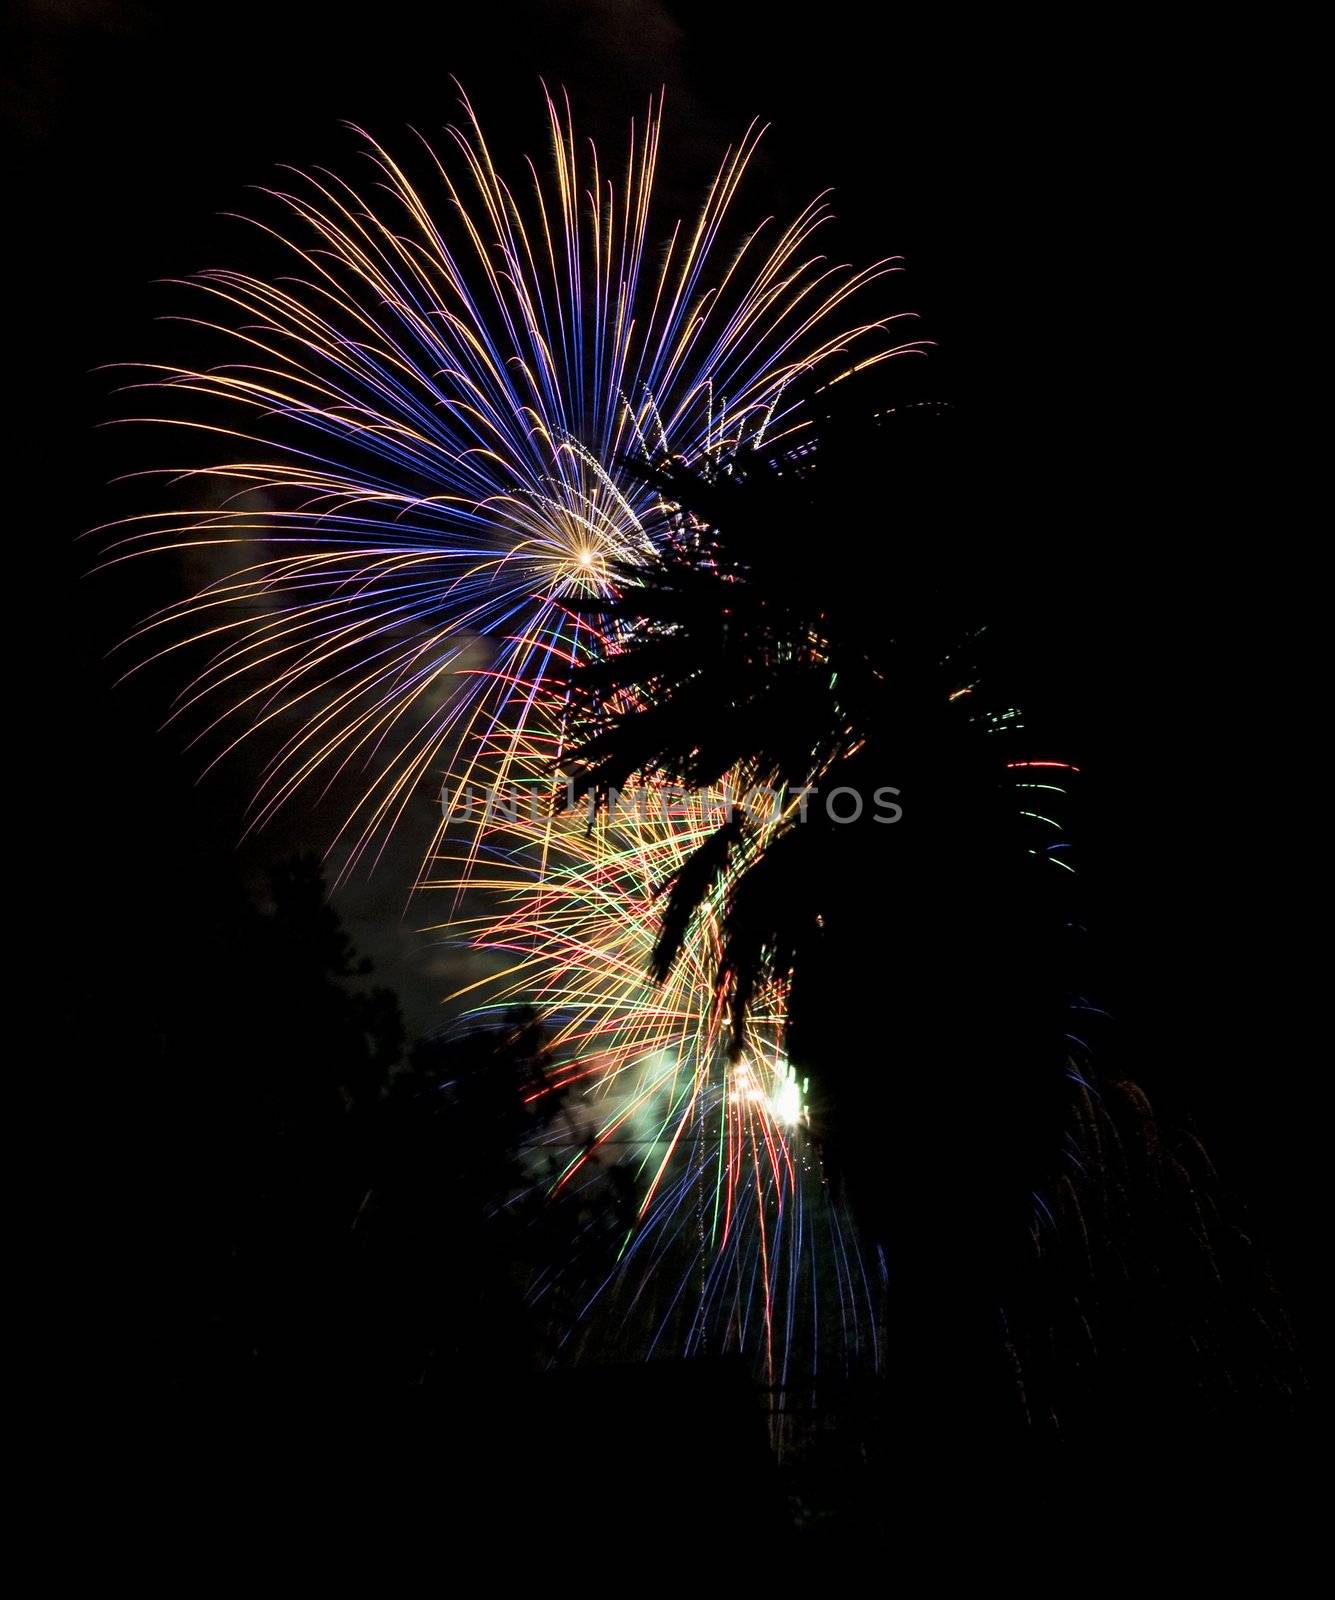 Fireworks behind a palm tree in silhouette